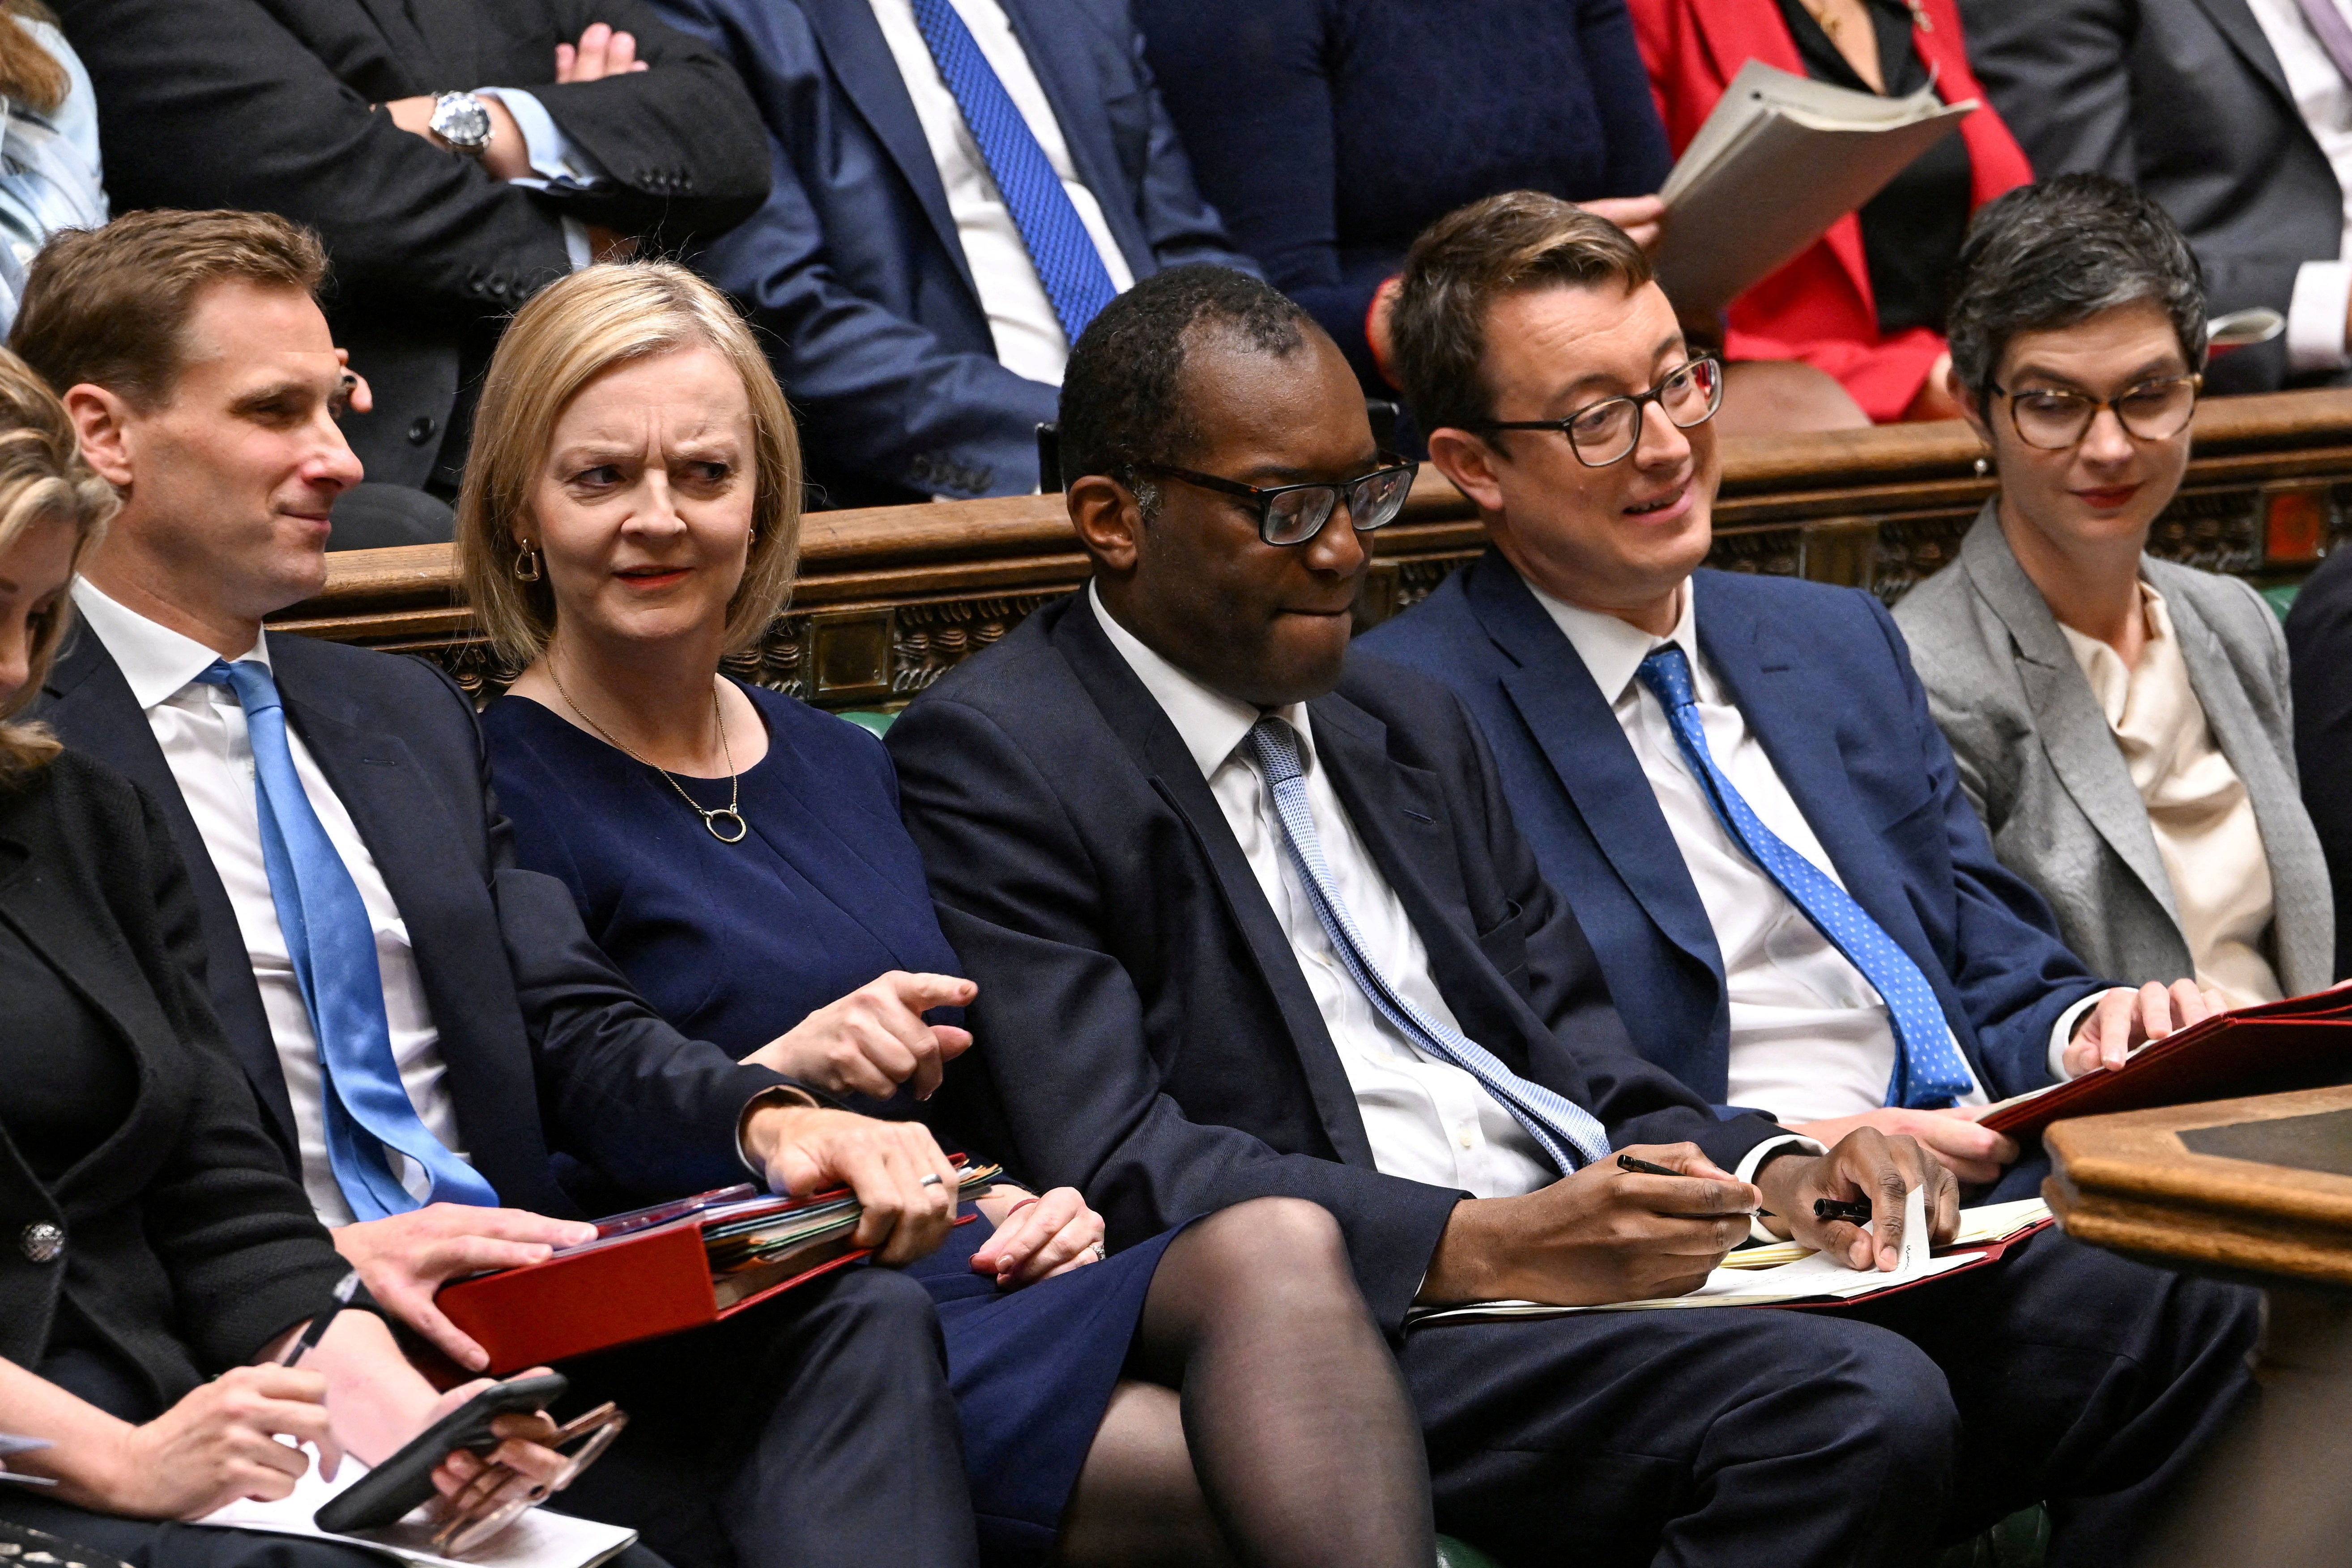 Kwasi Kwarteng was reportedly ‘high on adrenaline’ at drinks event after mini-Budget